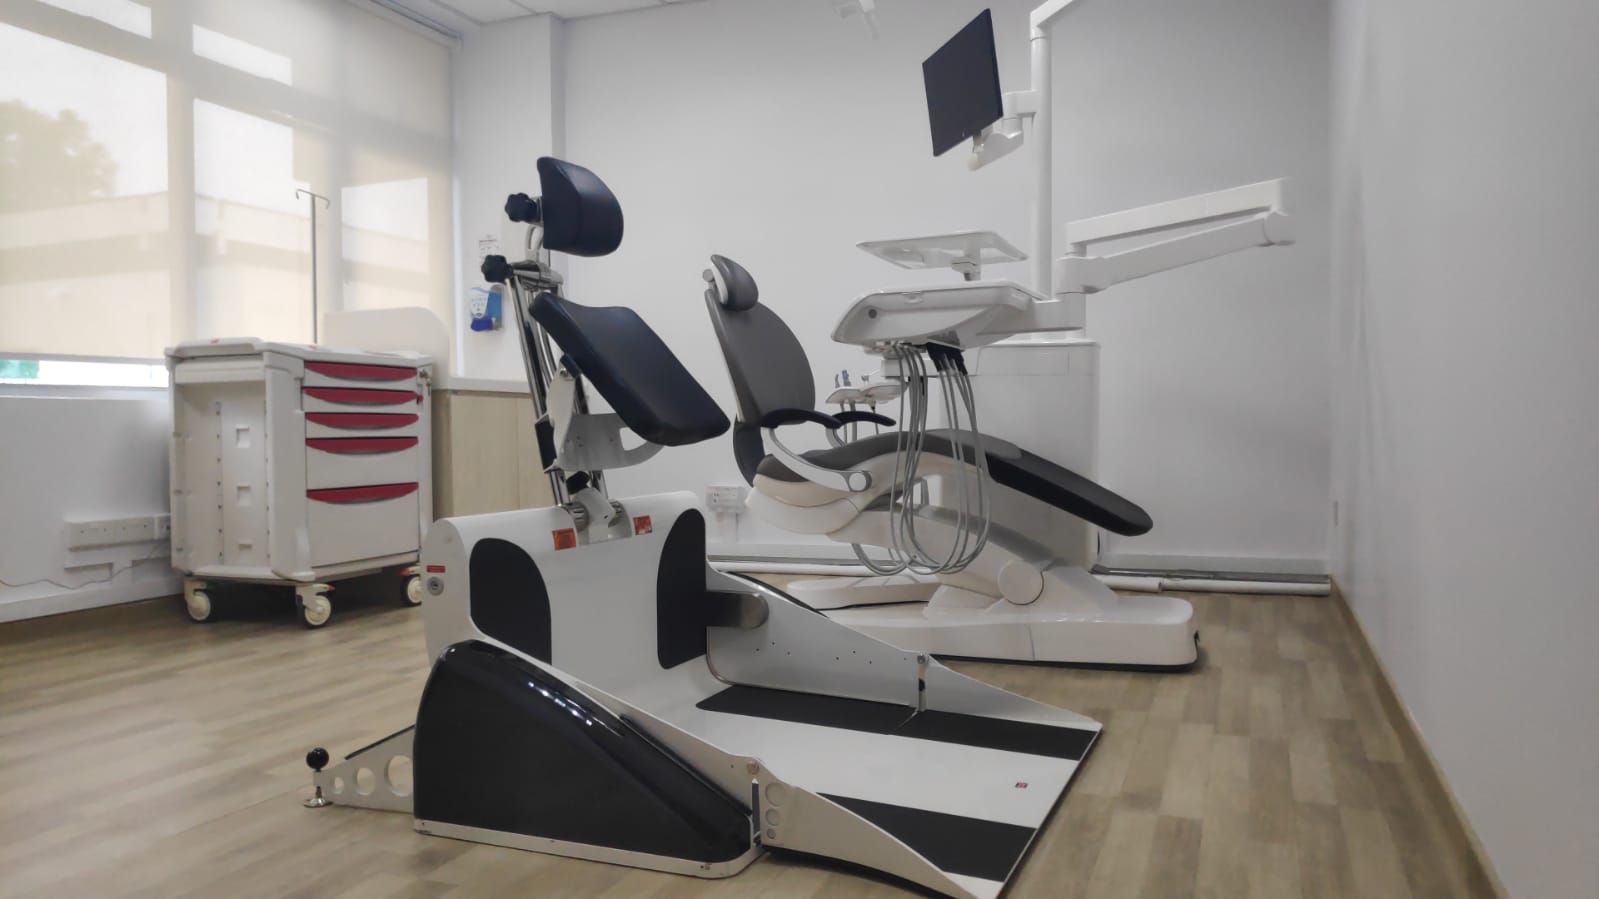 A wheelchair tilter positioned next to a regular dental chair in the dental clinic.